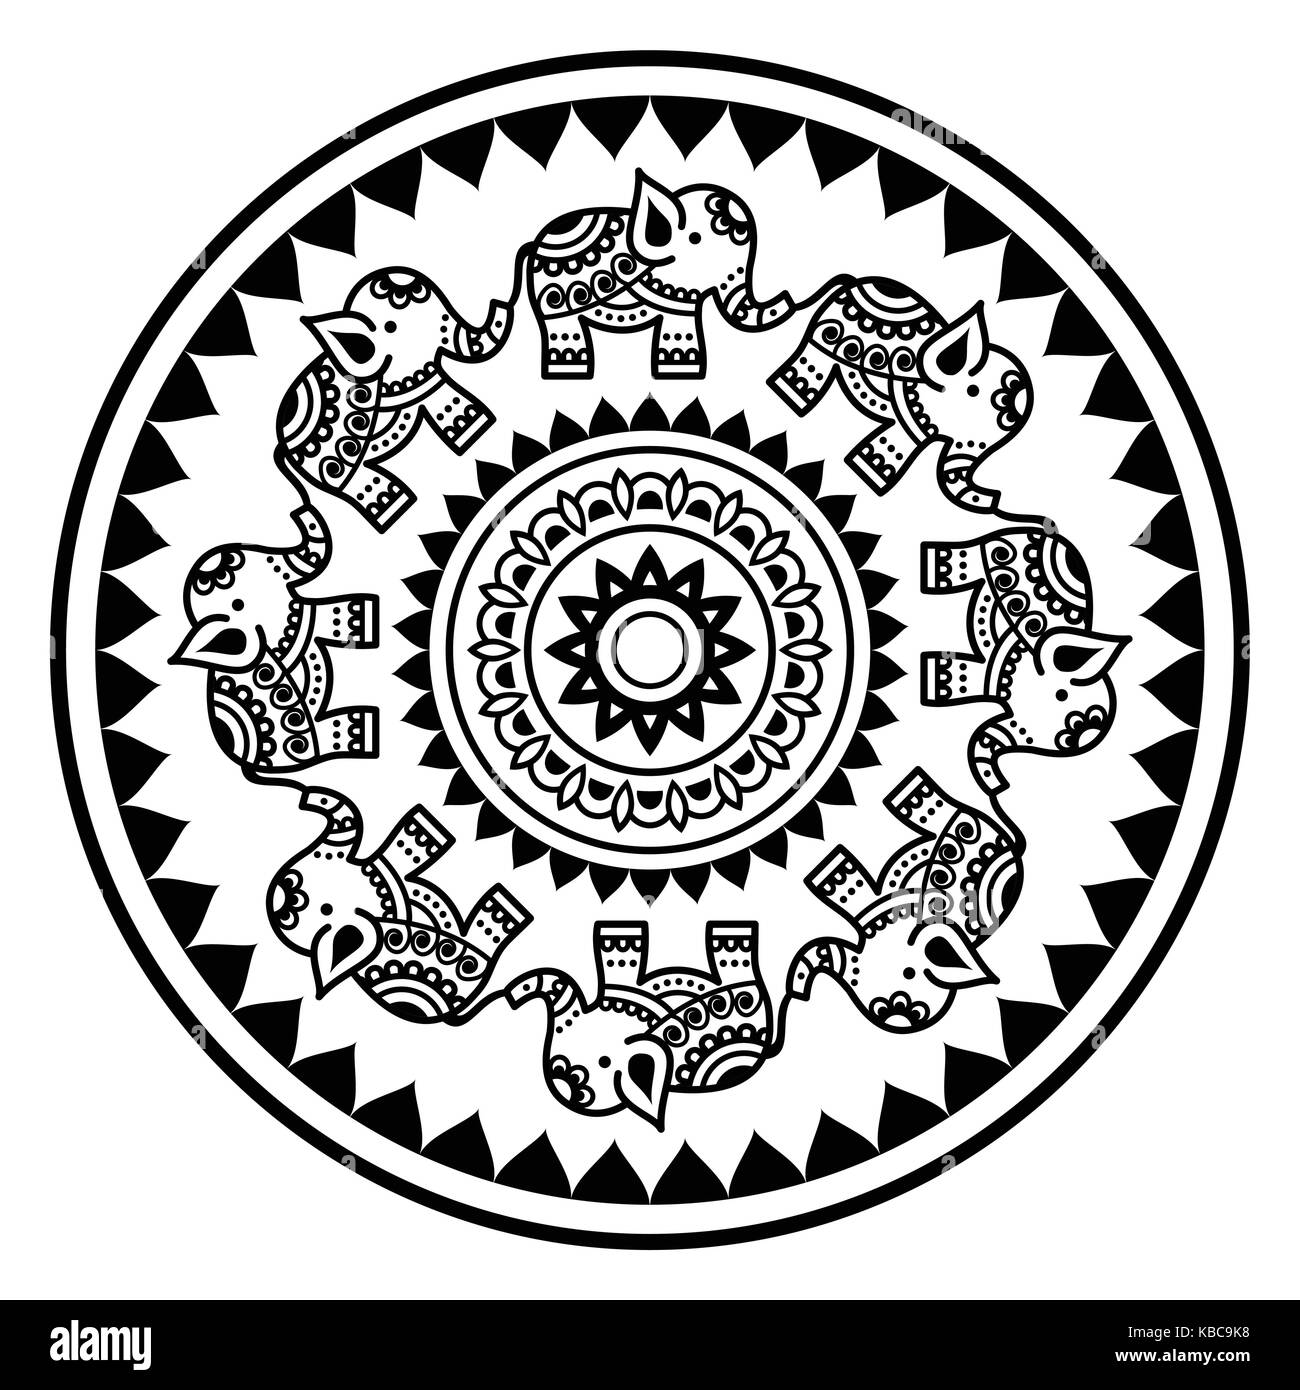 Indian mandala with elephants and abstract shapes, Mehndi - Indian Henna tattoo style vector pattern Stock Vector